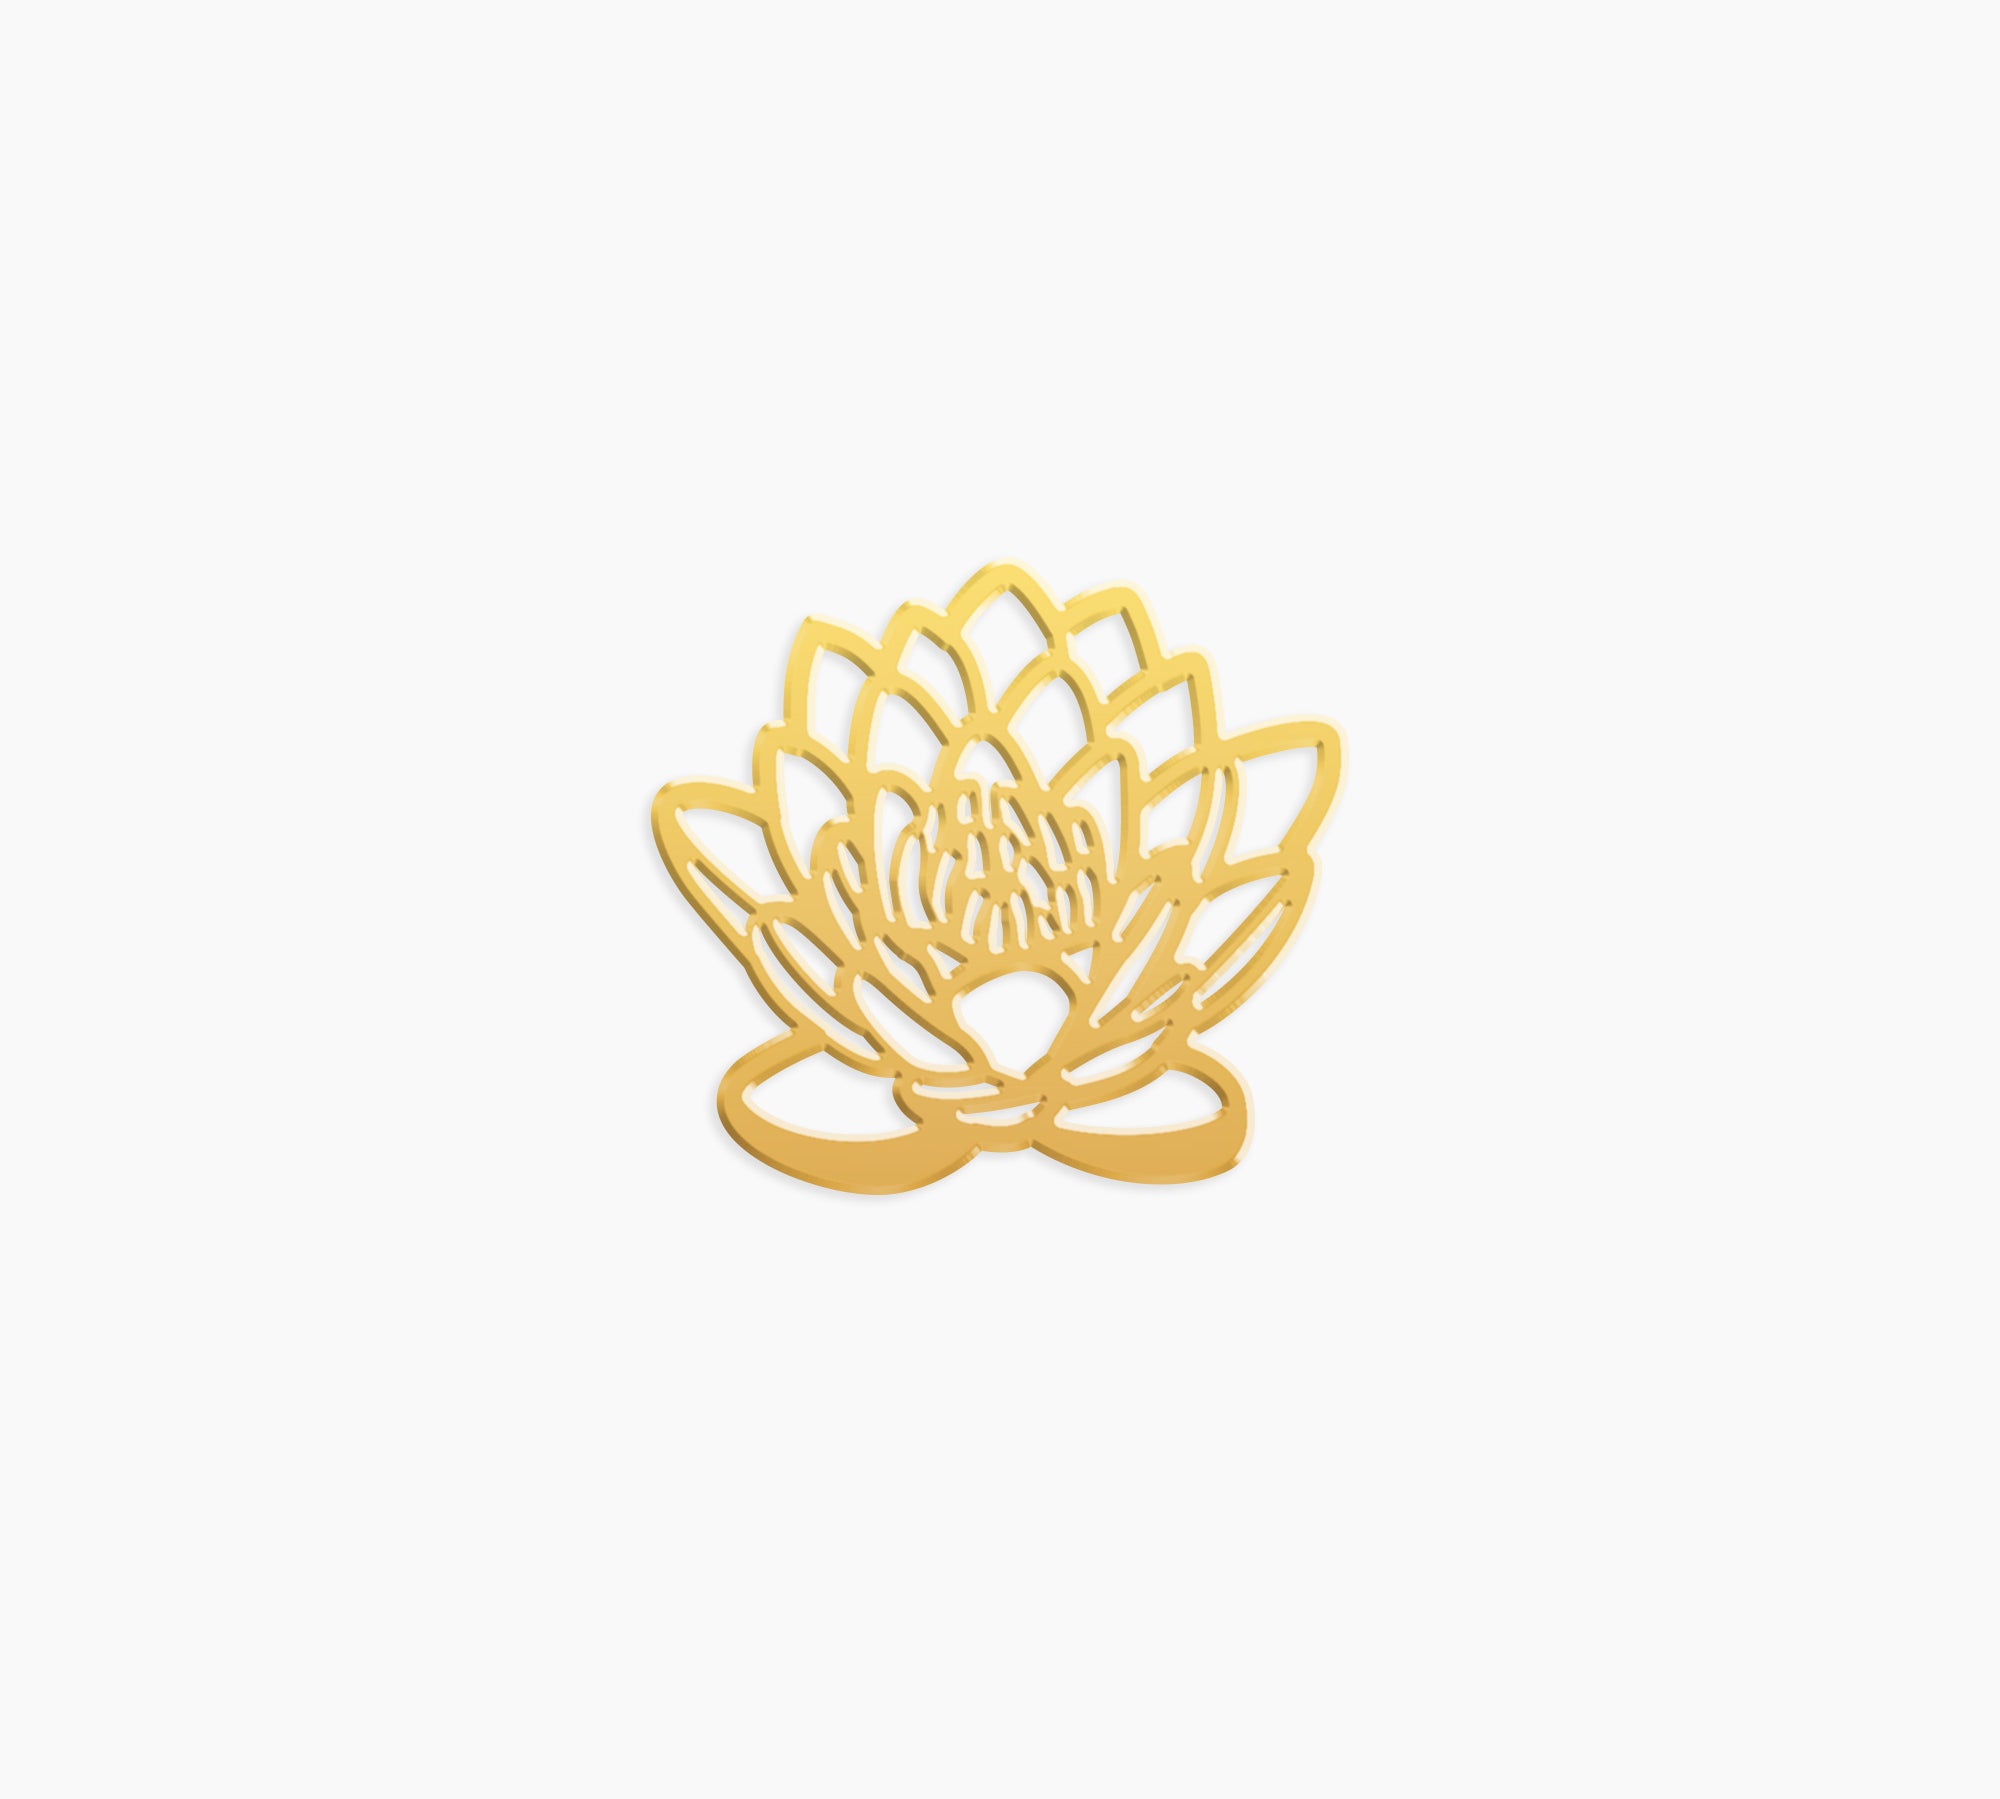 Water Lily Charm - High Quality, Affordable, Whimsical, Hand Drawn Individual Charms for a Custom Locket - July Birthday Gift - Available in Gold and Silver - Made in USA - Brevity Jewelry